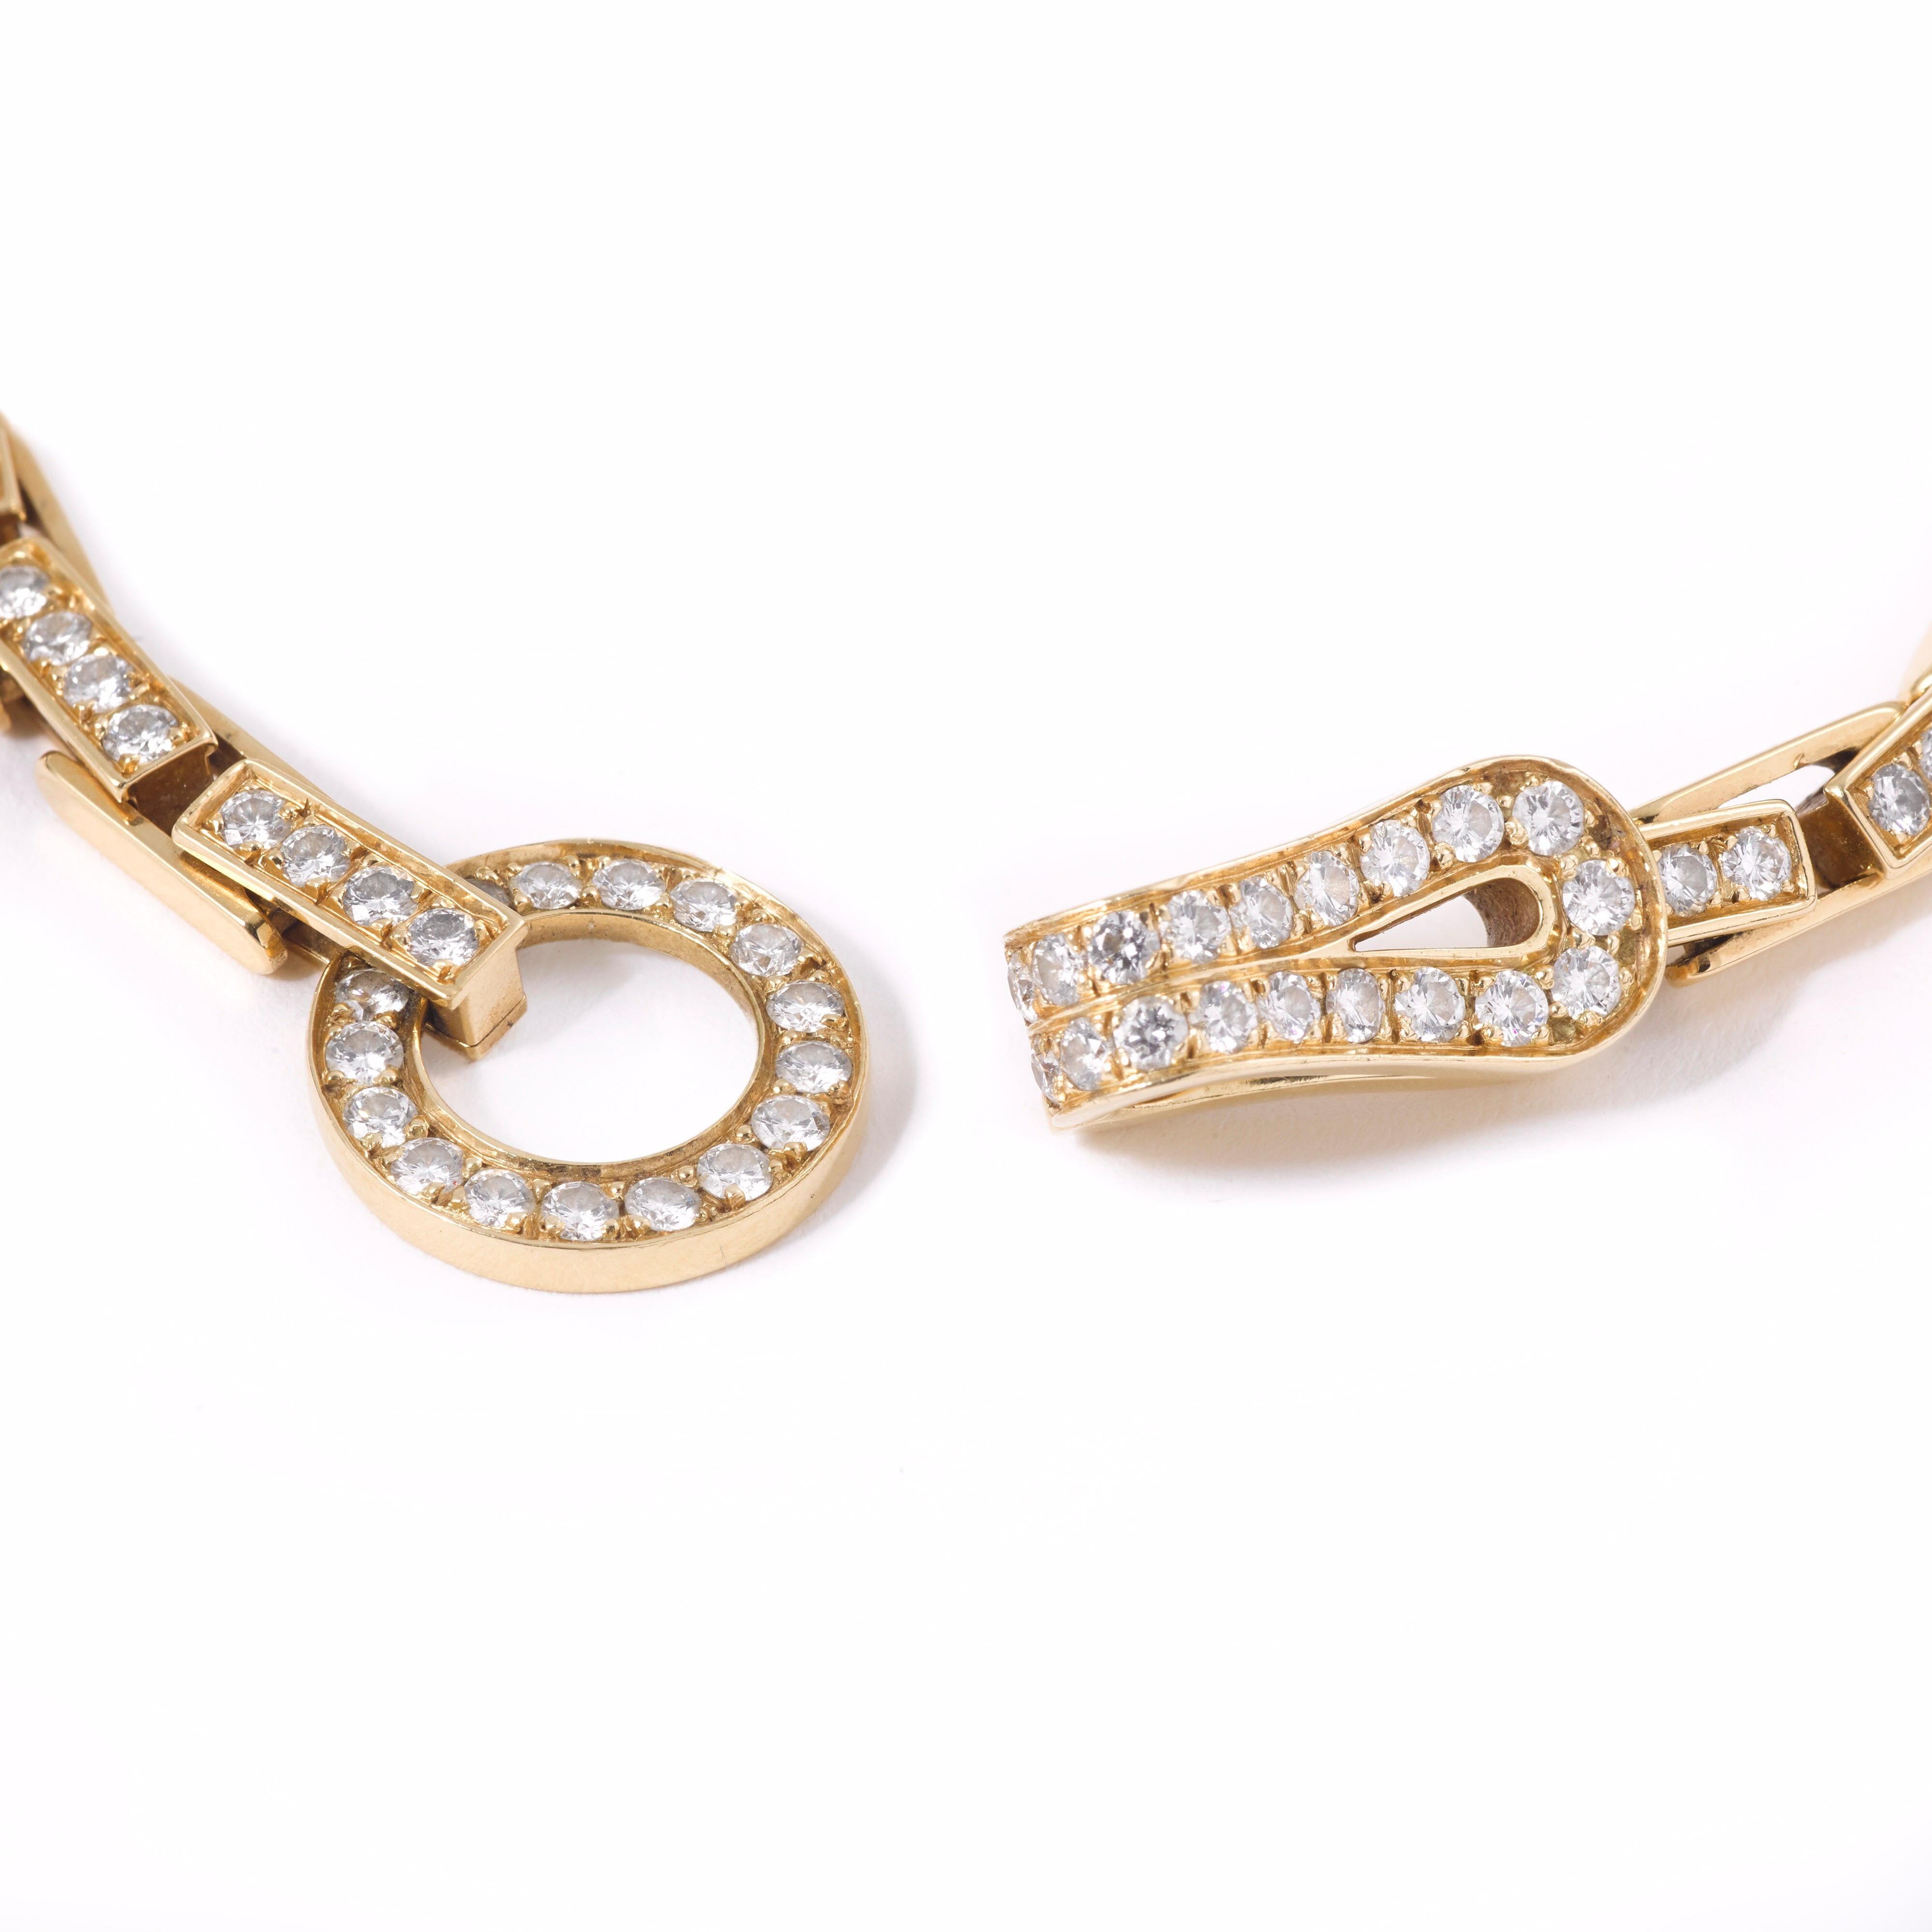 Amazing iconic Cartier Agrafe diamonds 18k Yellow Gold Bracelet.

The Agrafe collection (The word Agrafe in French meaning clip / hook referring to the hook-shape clasp of the necklace) is not longer available at Cartier but this bracelet would be